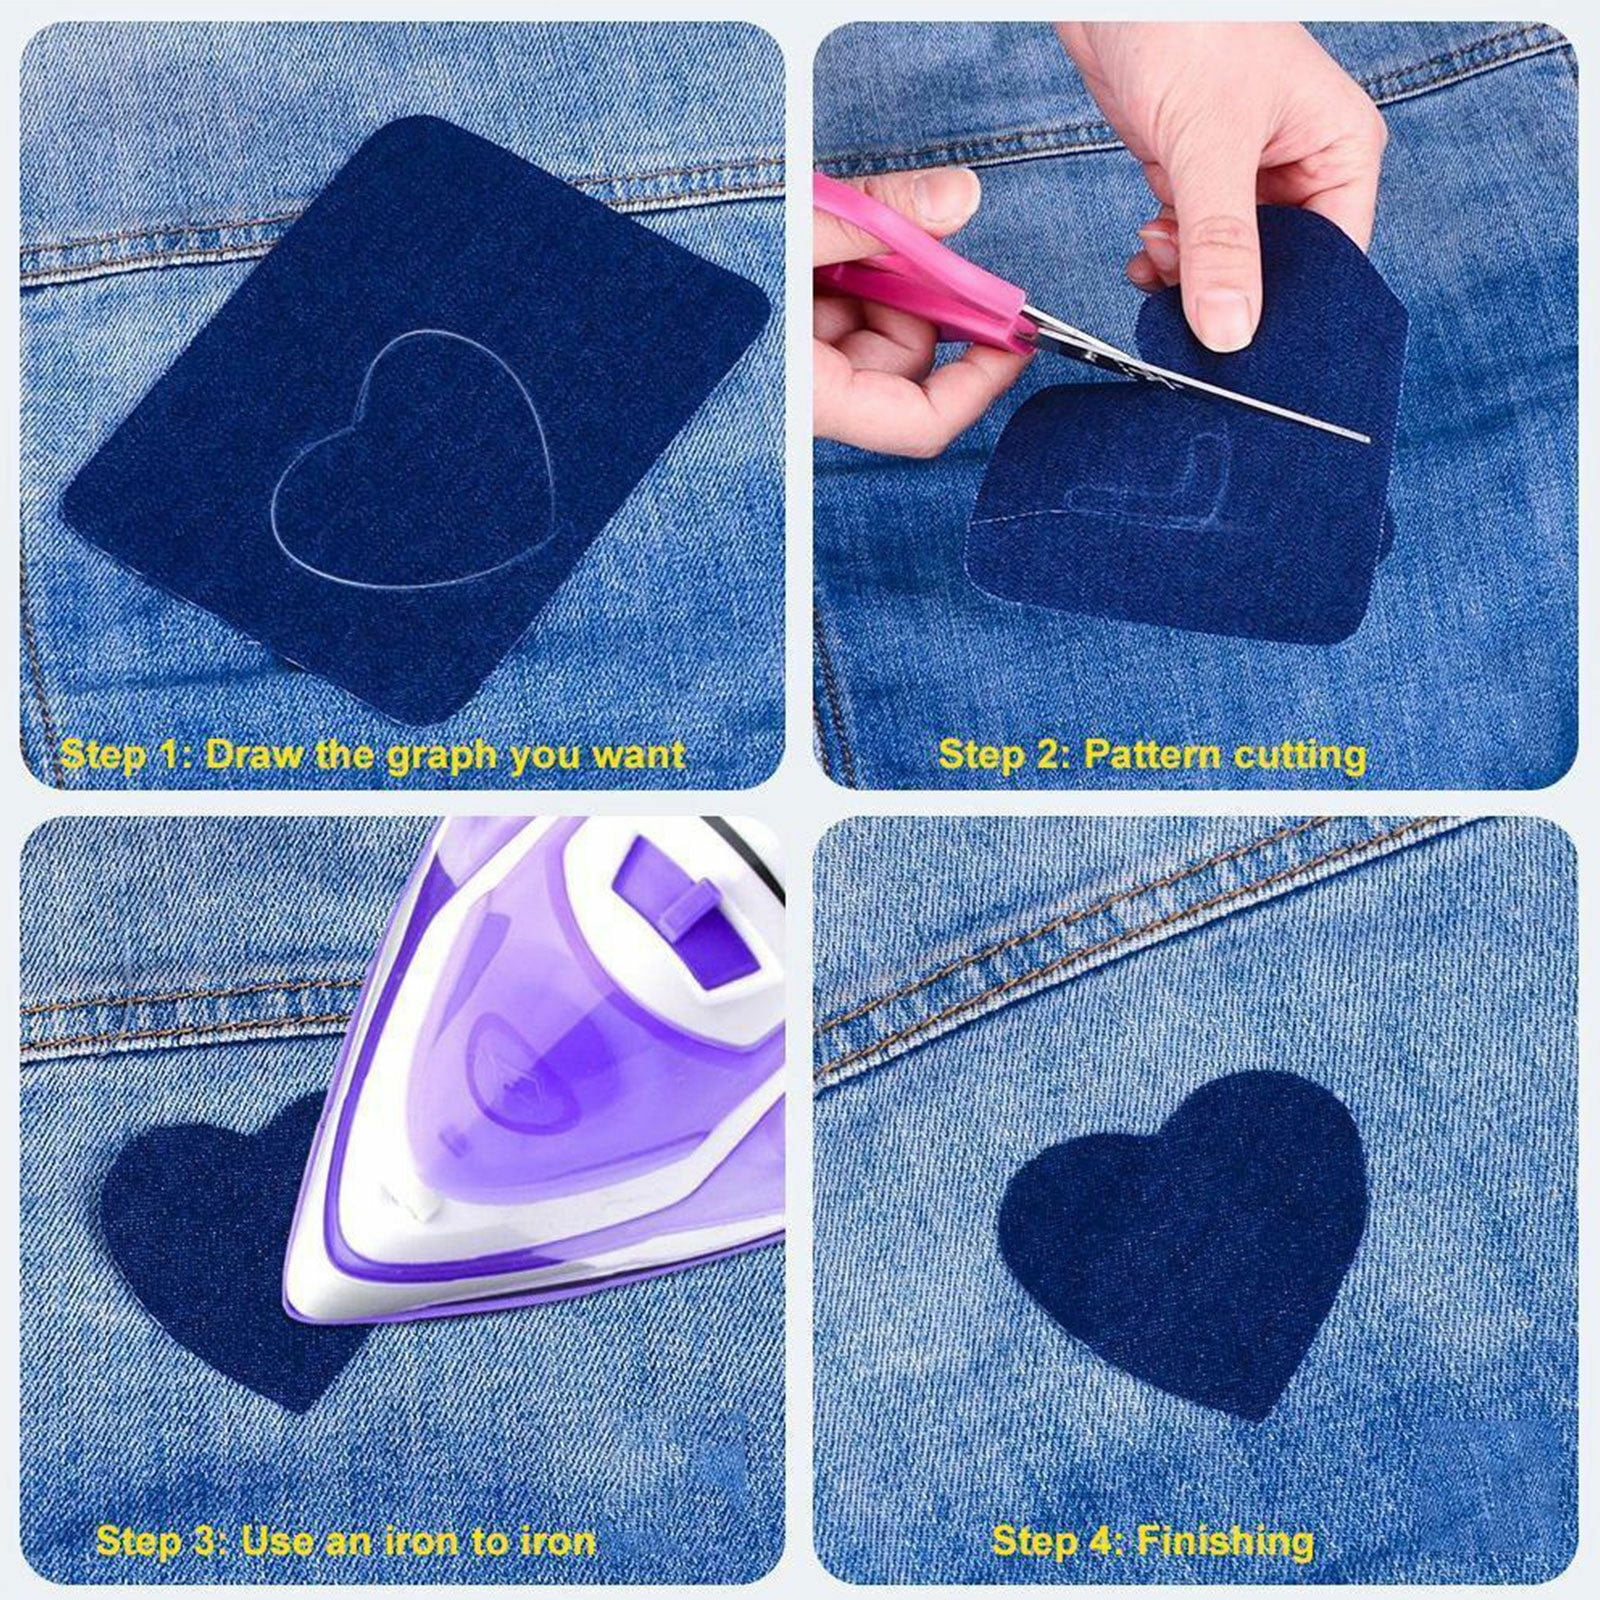 TSV 20pcs Iron on Patches for Clothing Repair, Adhesive DIY Denim Patches  for Jeans, Jackets and Bags, 4''x5'', 9 Colors 